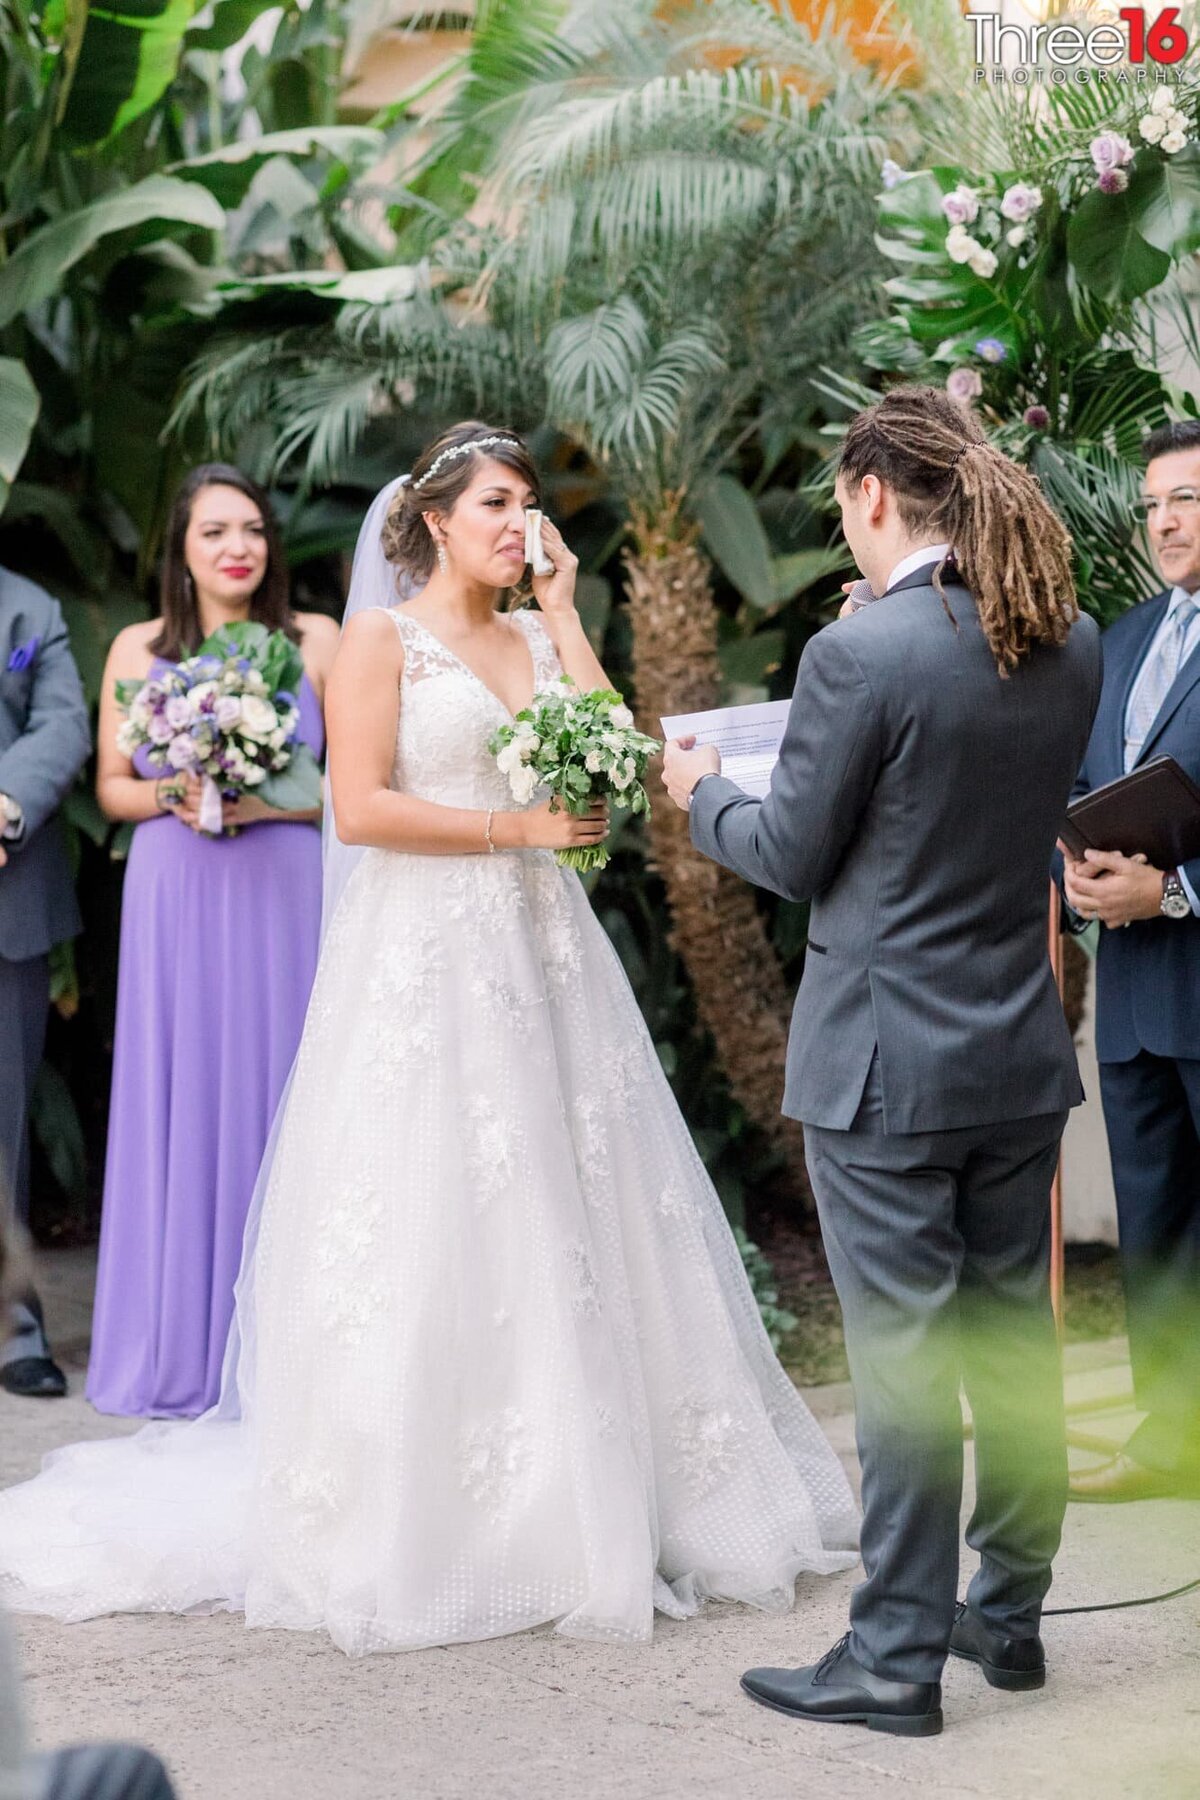 Bride wipes away a tear as her Groom reads his wedding vows to her